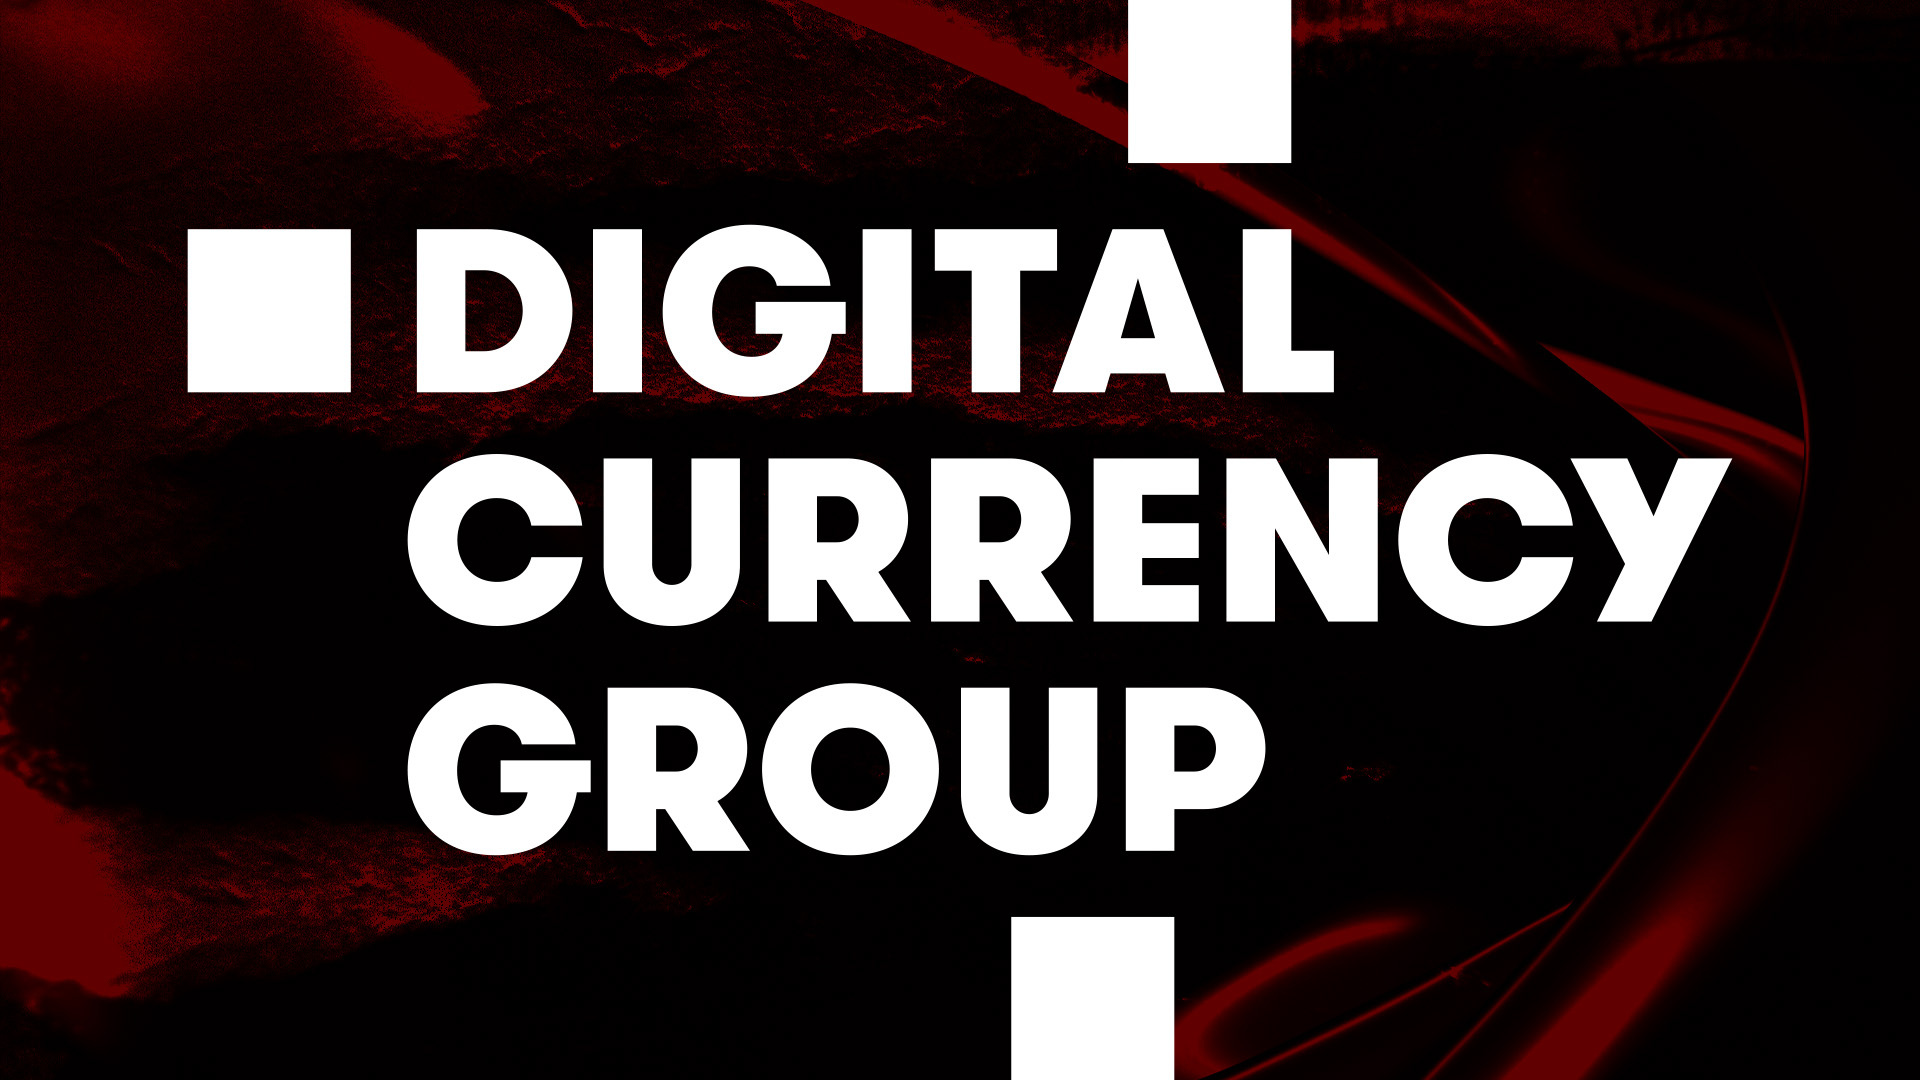 Digital Currency Group Bán Cổ Phiếu Quỹ Của Grayscale